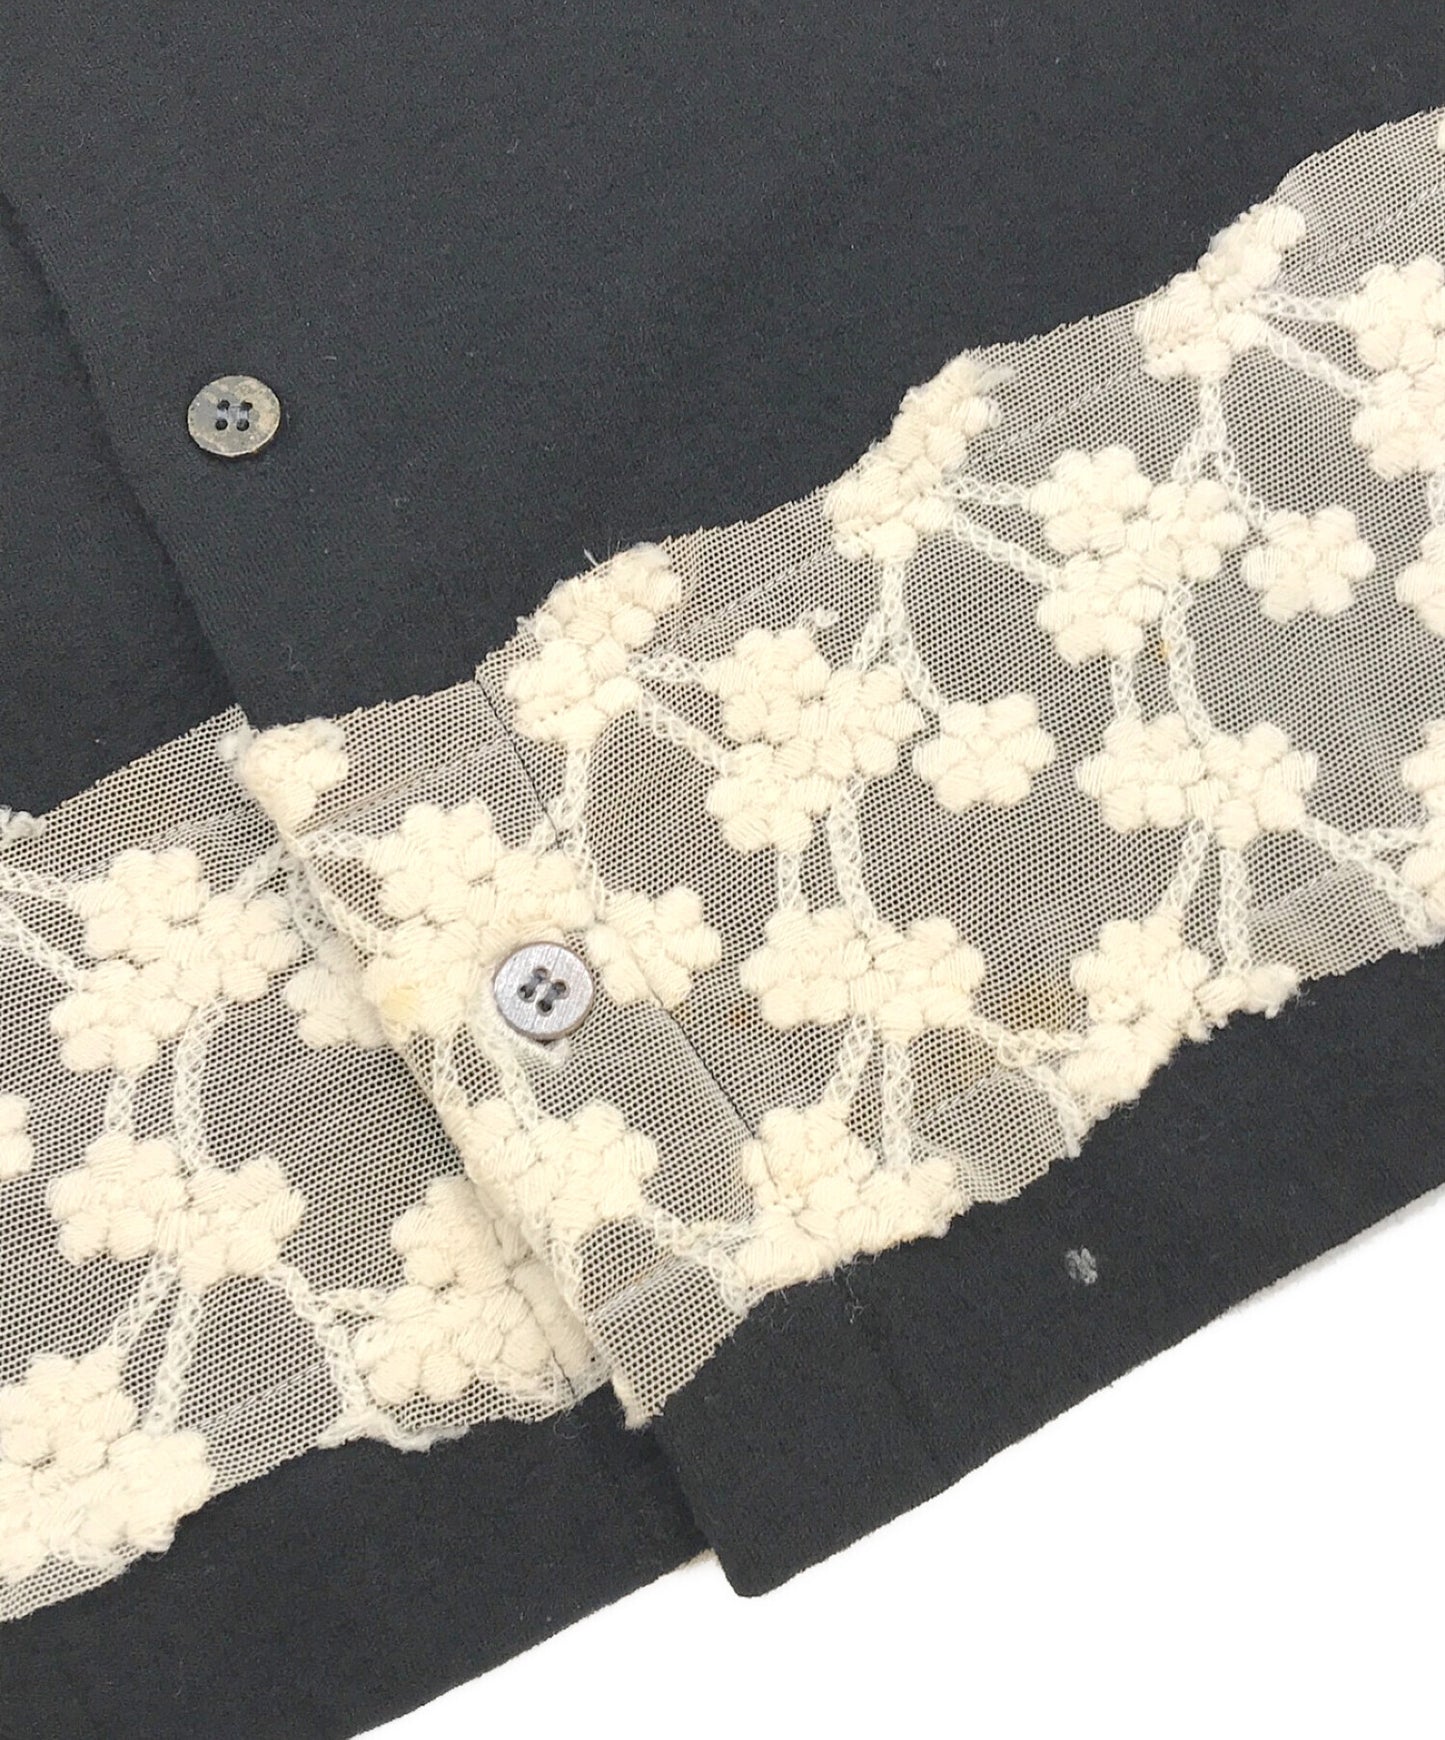 Tricot Comme des Garcons [旧] 90年代下摆蕾丝羊毛衬衫TT-070140